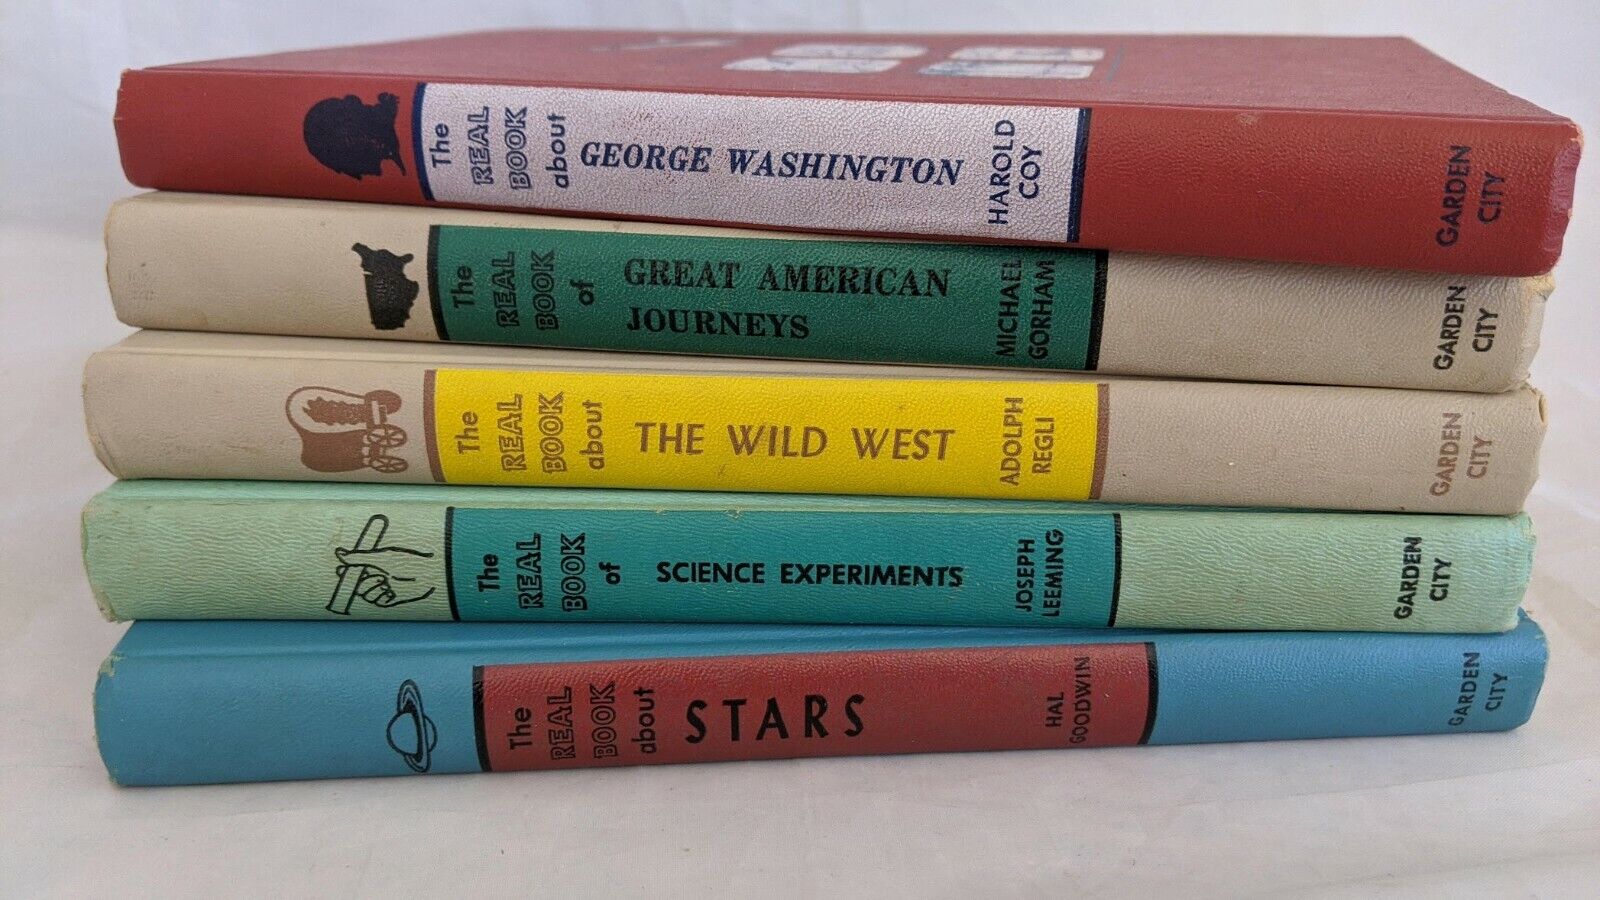 The Real Book About American Journeys, Wild West, Washington & More Lot 5 1950’s